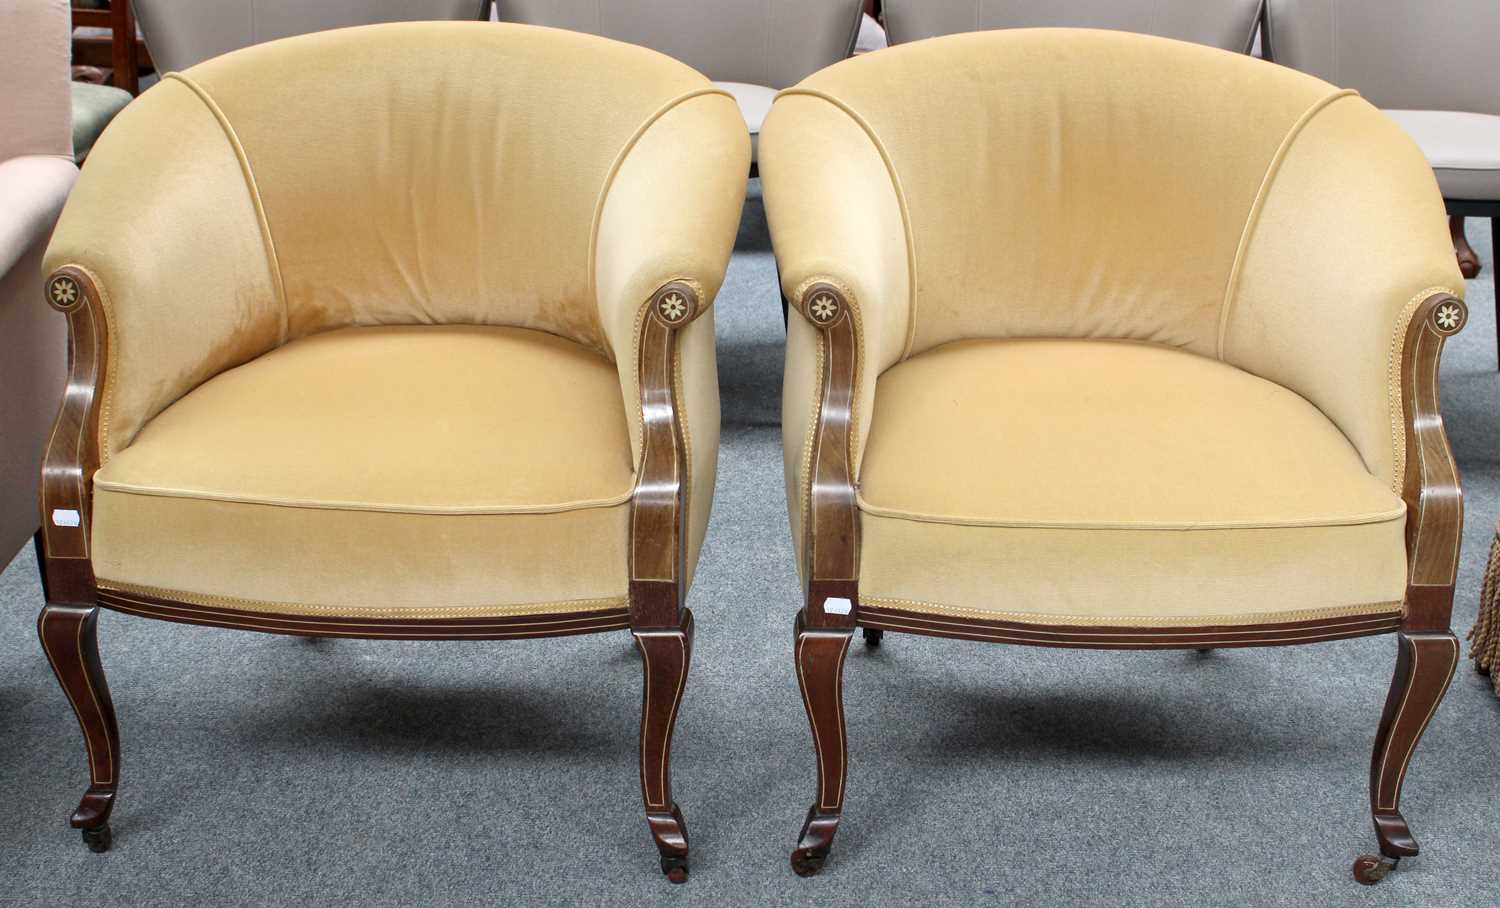 A Pair of Edwardian Inlaid Mahogany Horse Shoe Back Chairs